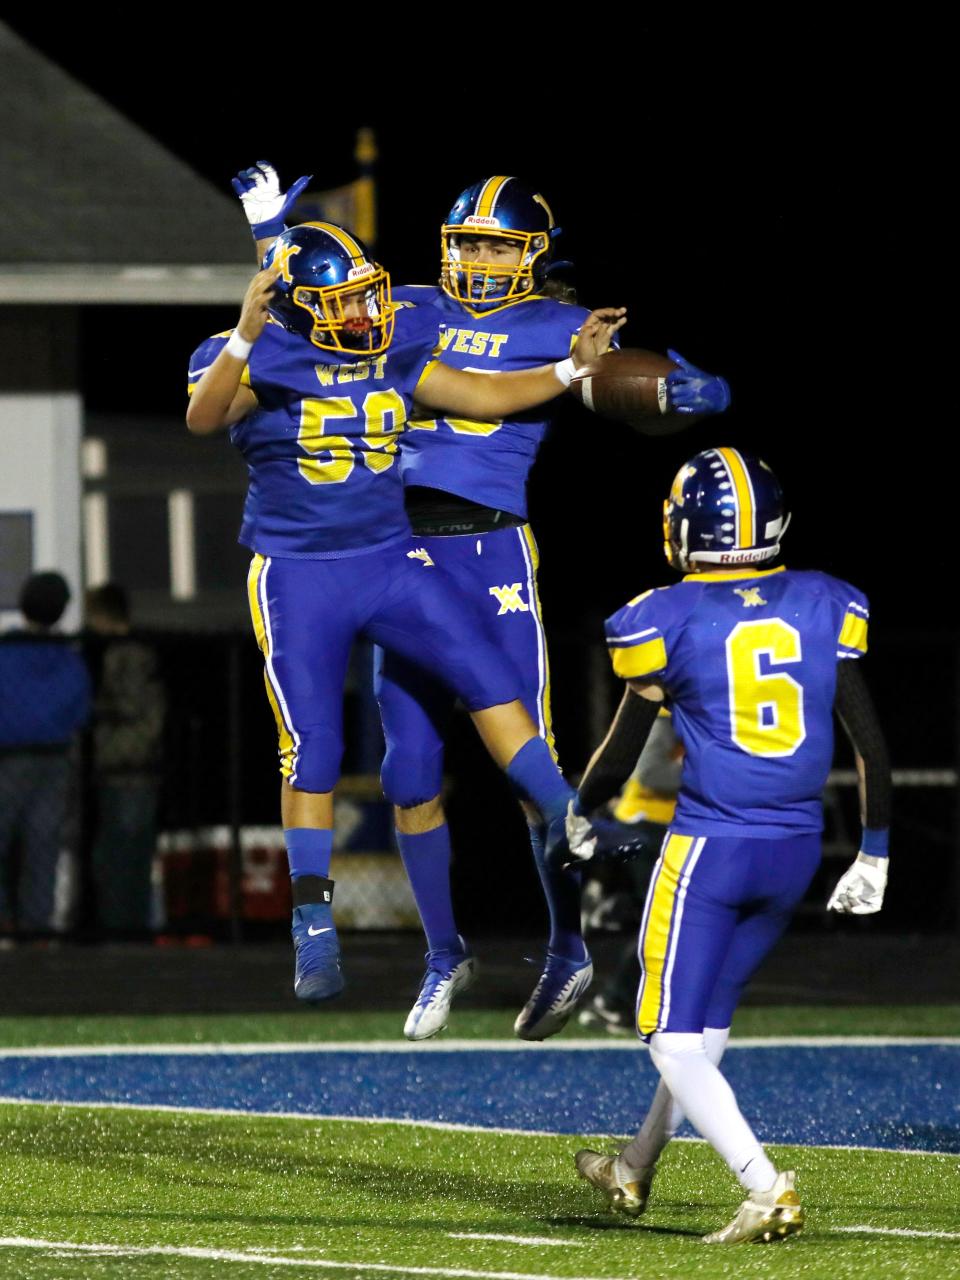 Slater Sampsel celebrates with sophomore Kaiden Fleming, left, after catching a 34-yard touchdown pass in the second quarter of West Muskingum's 26-20 win against visiting Morgan on Friday night in Falls Township. Slater caught three touchdowns.